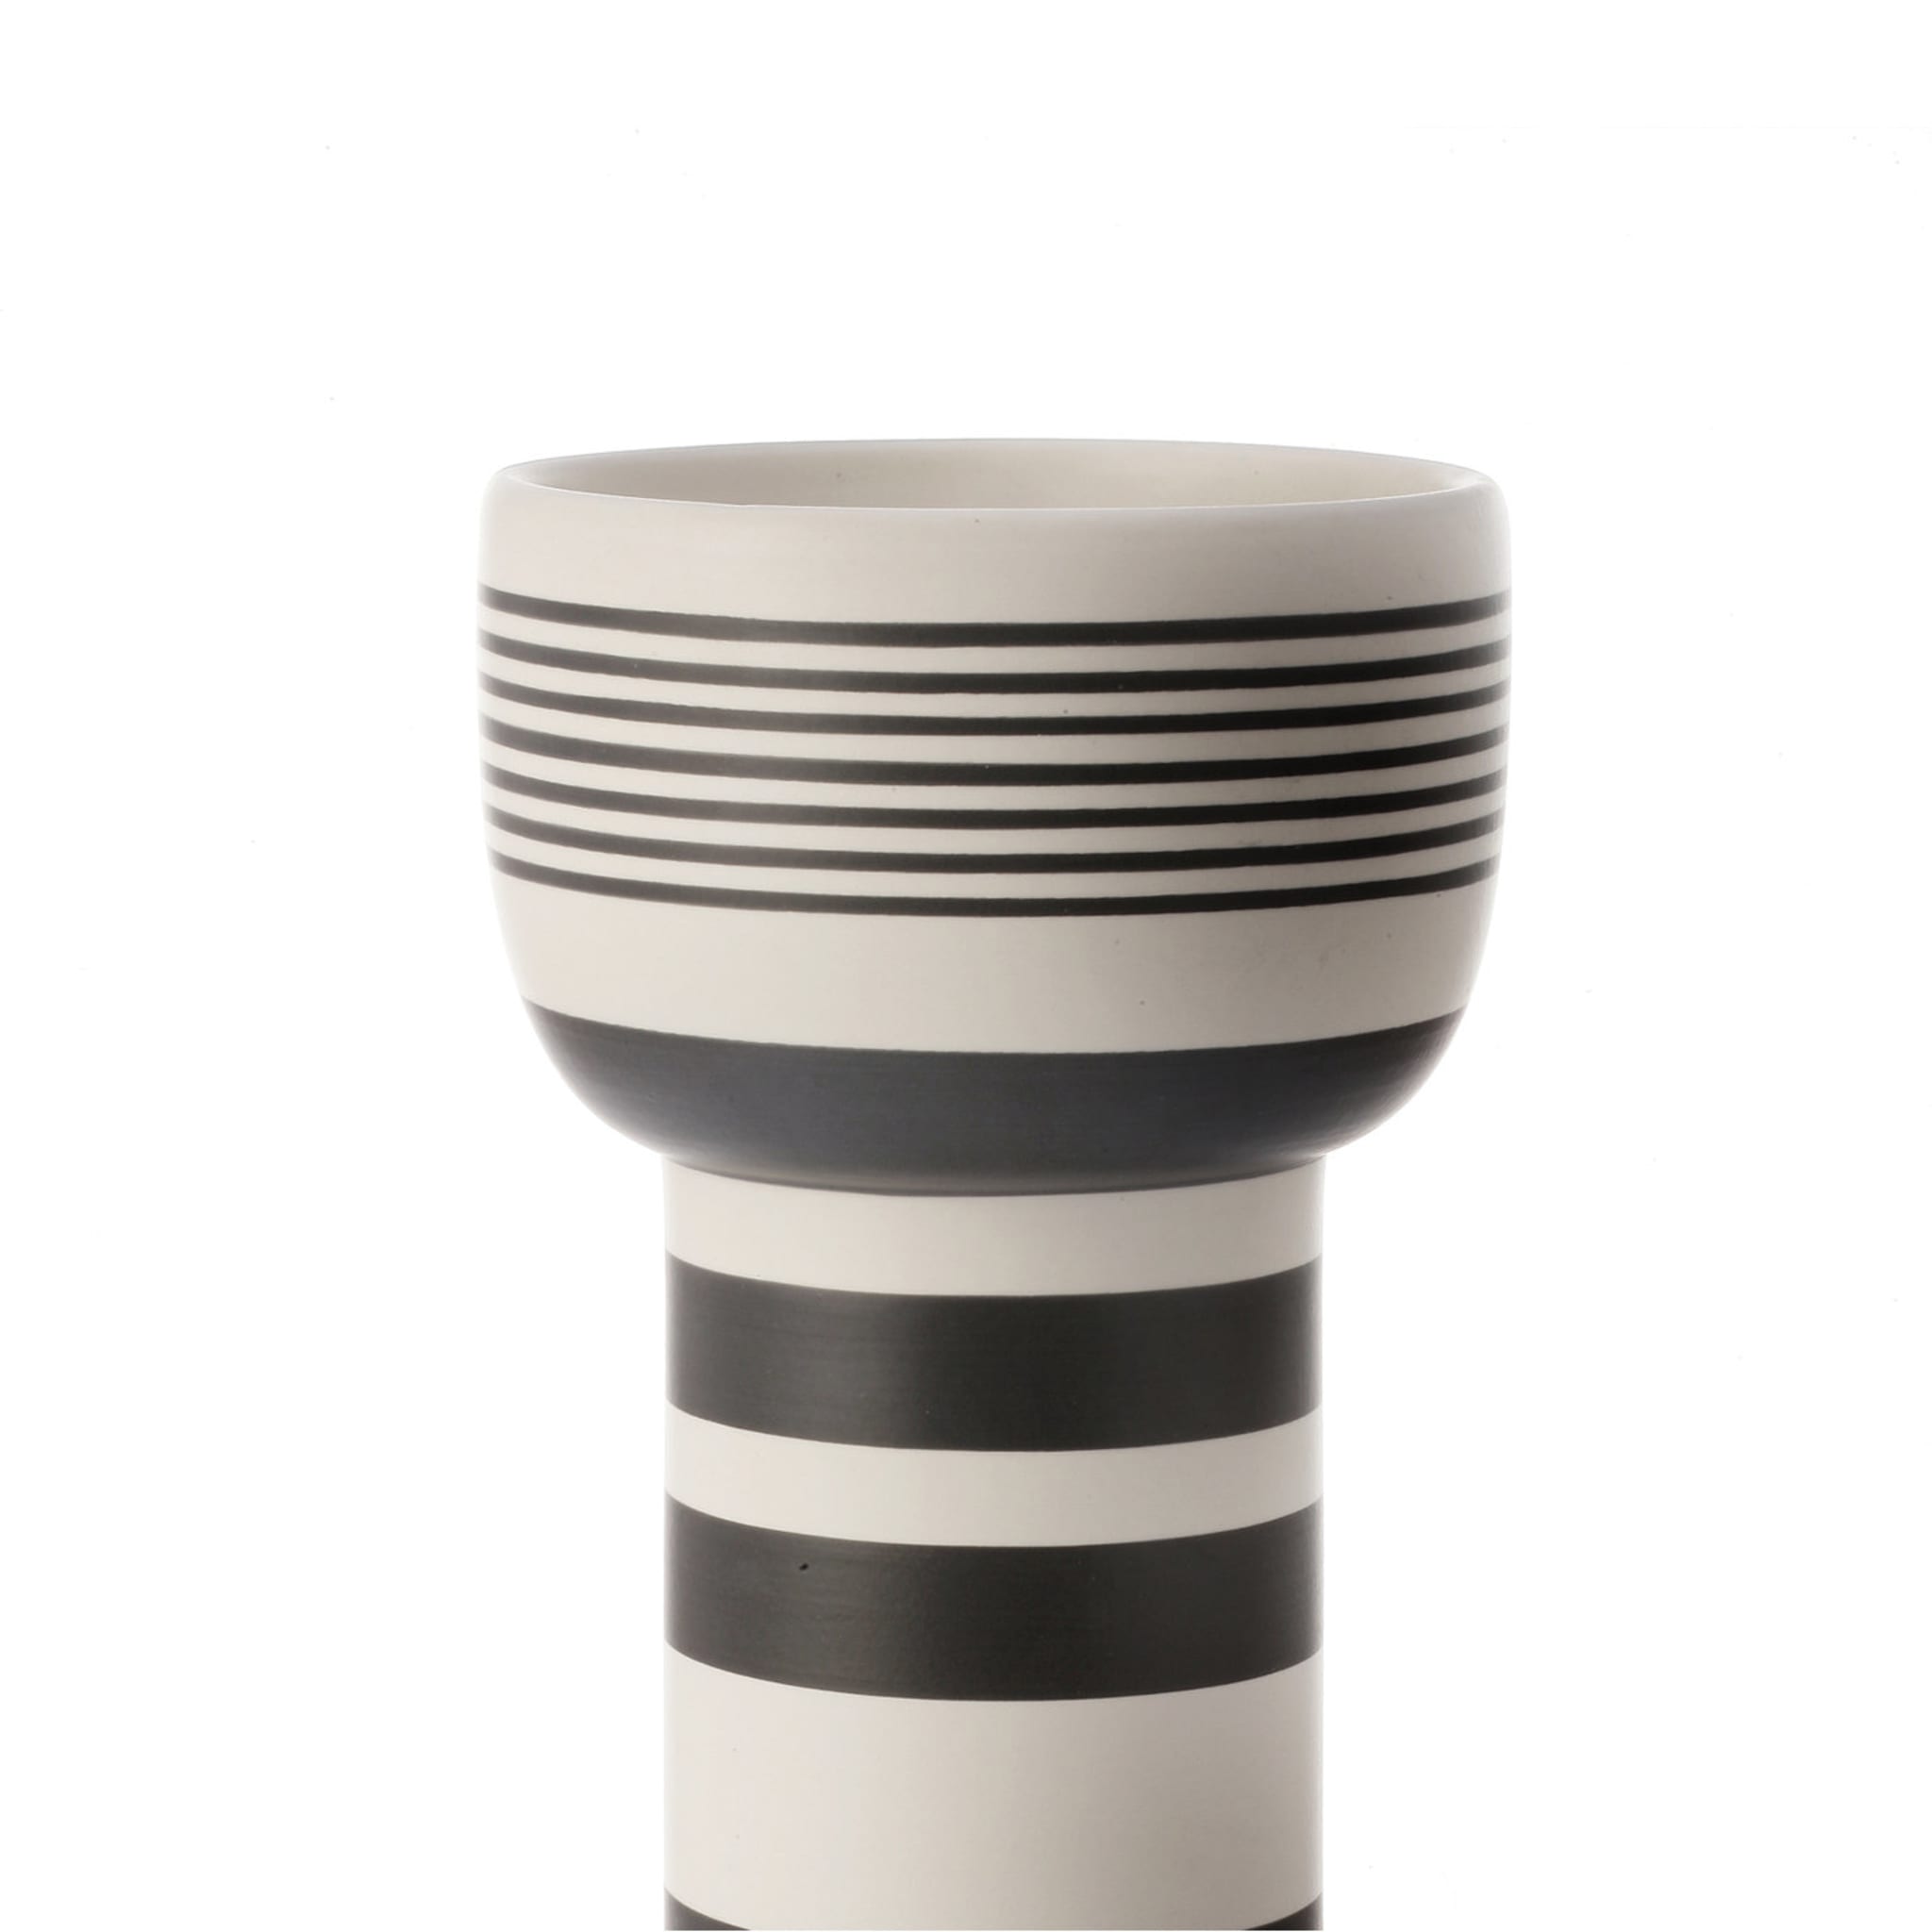 Chalice Vase by Ettore Sottsass - Alternative view 1